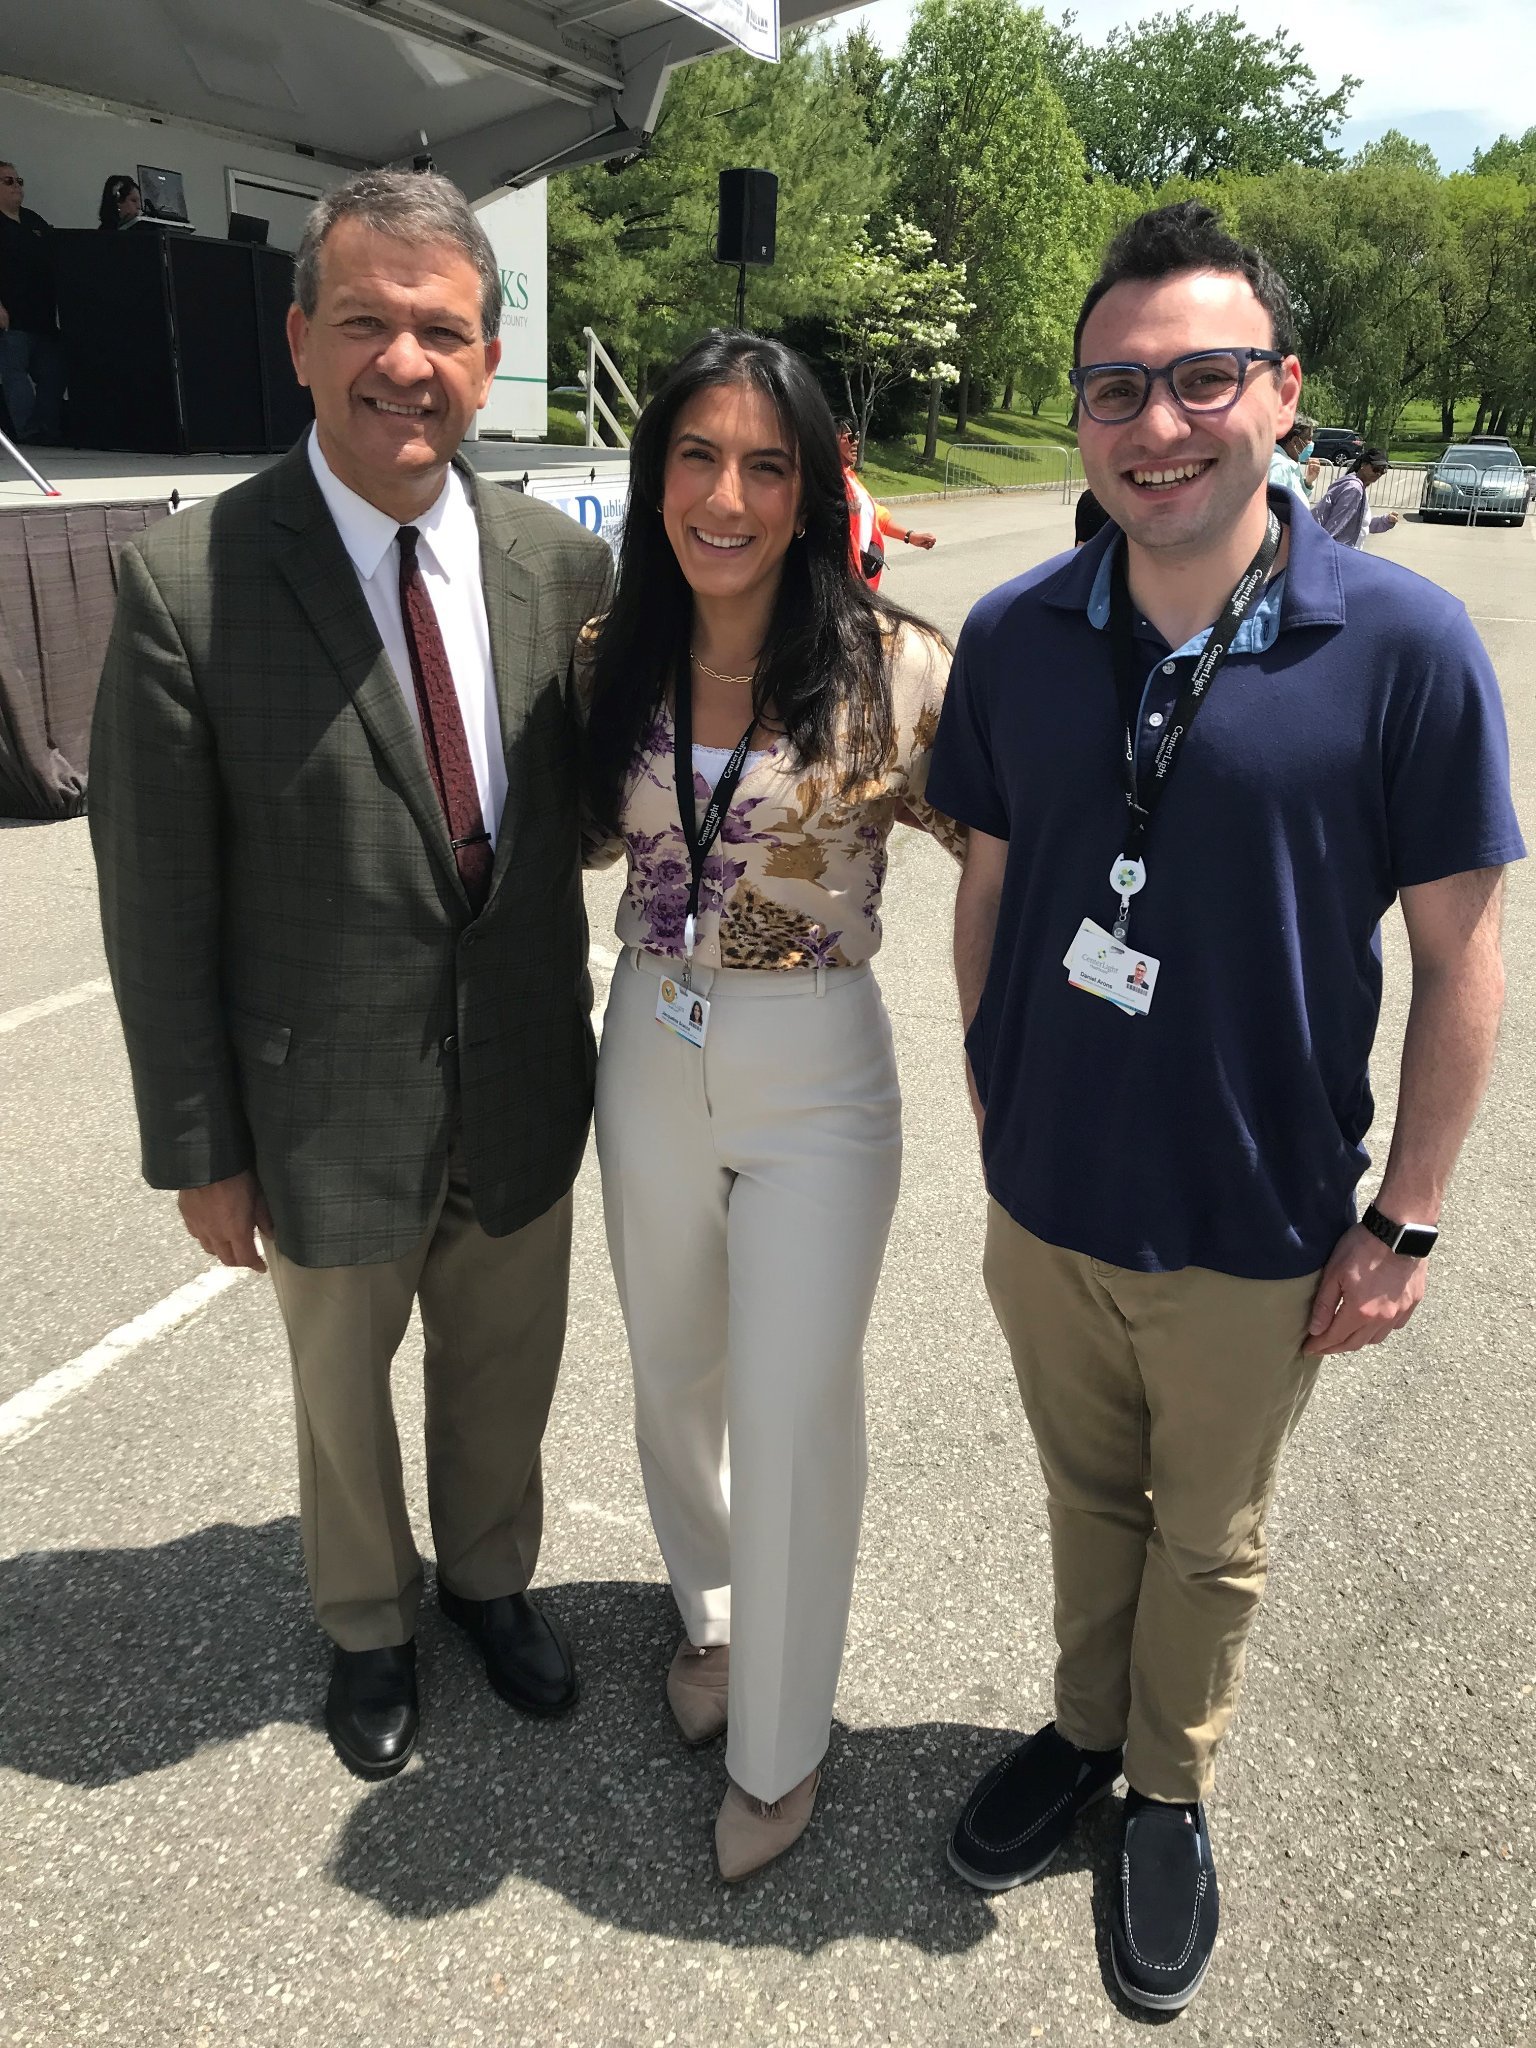  At Salute to Seniors in Westchester County, we had the opportunity to connect with Westchester County Executive George Latimer, Westchester County Legislator Collin Smith, and several other local officials.  